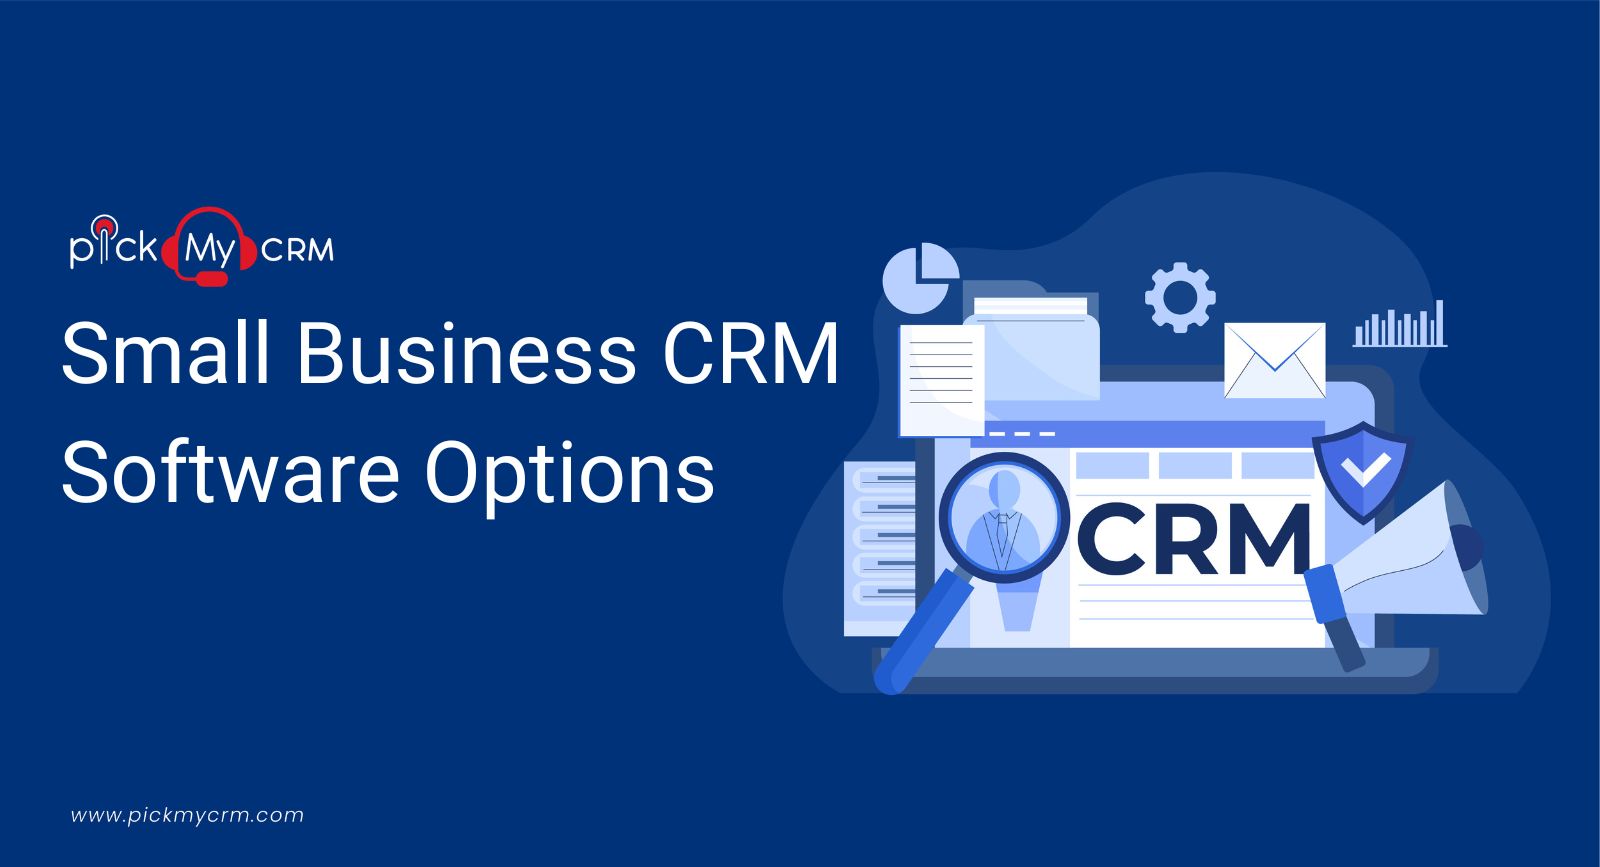 Small Business CRM Software options